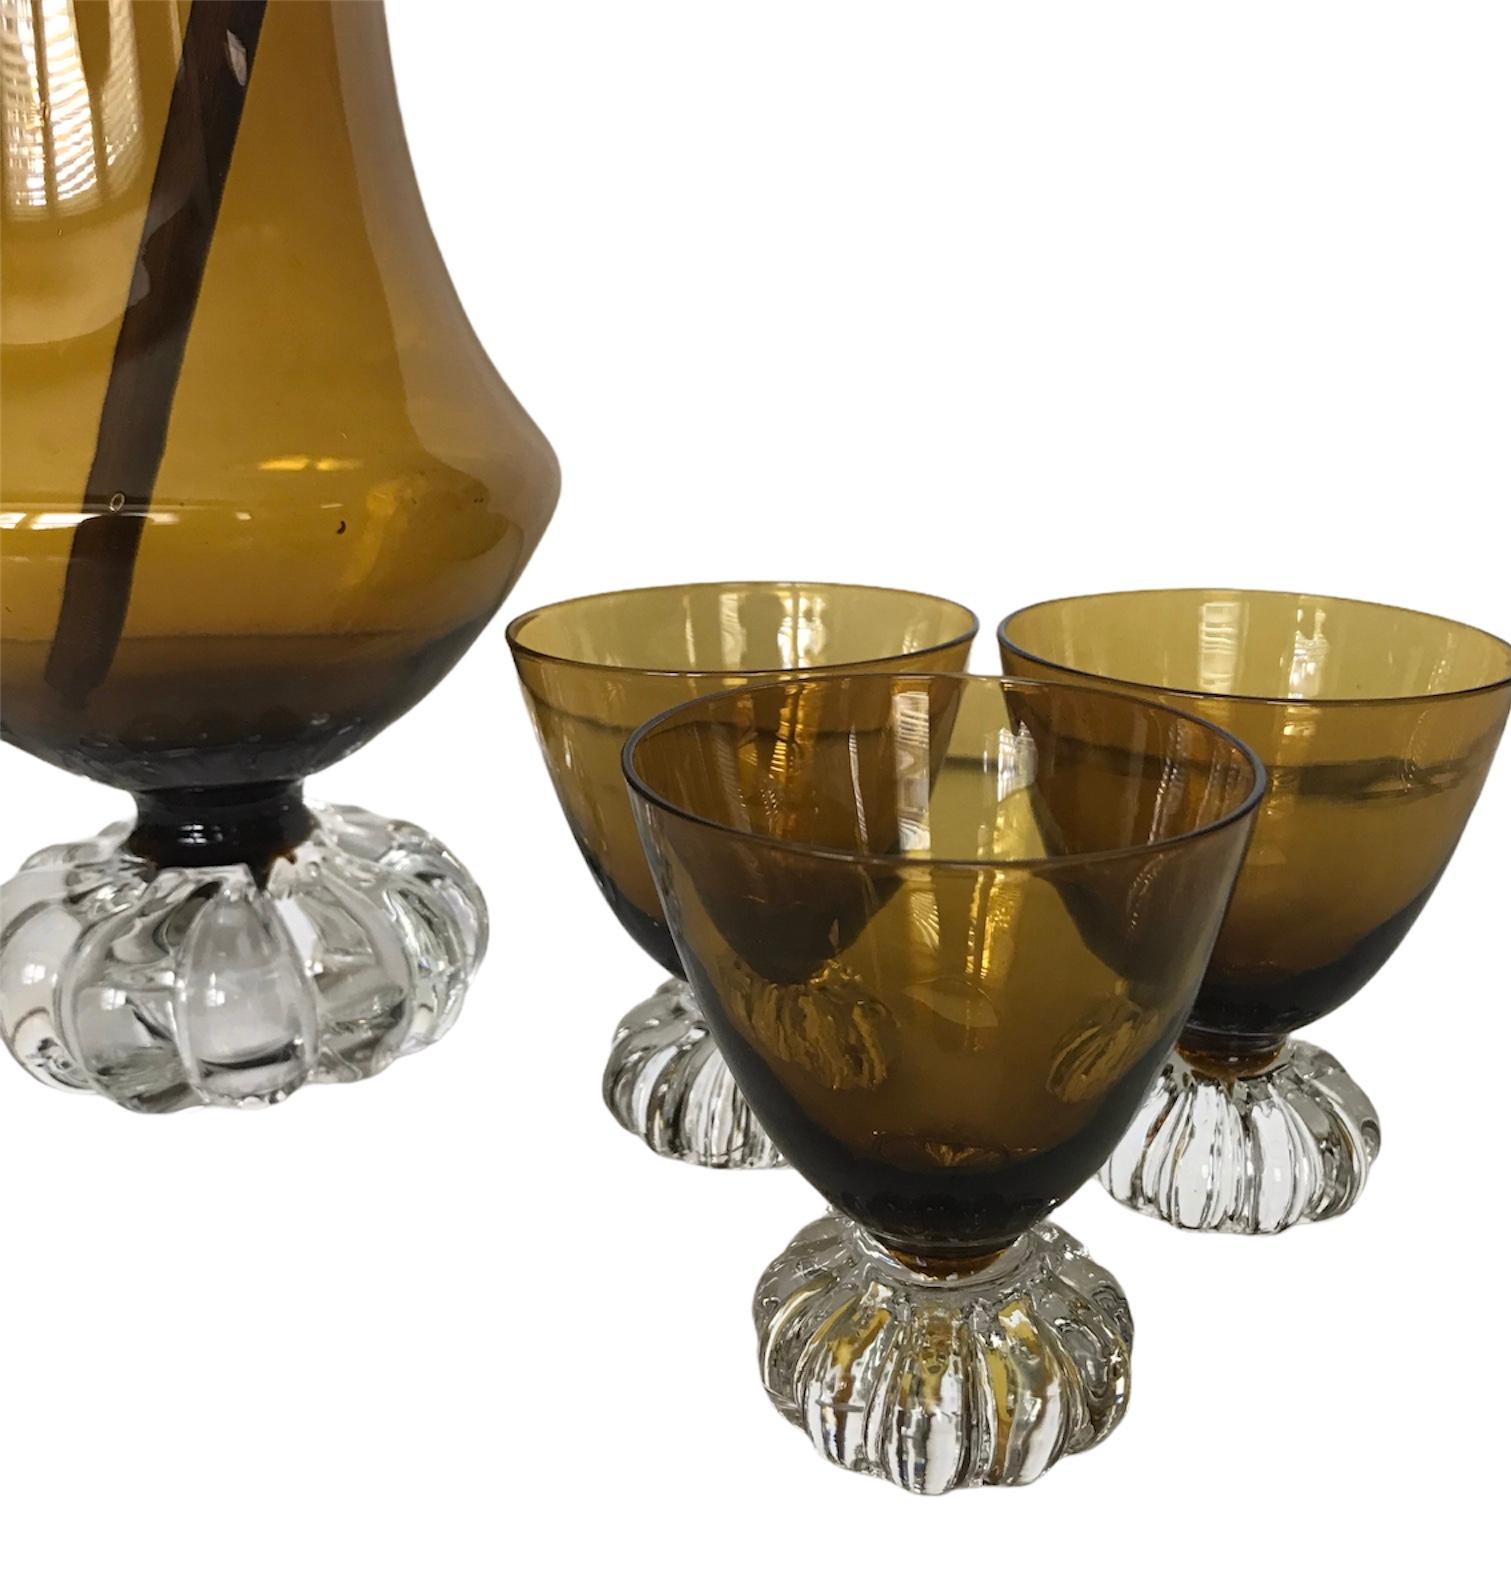 Such a strikingly, beautifully designed Amber colored glass barware set by Bo Borgström for Aseda Glasbruk of Sweden. Both the pitcher and glasses offer a scalloped edging with a weighted bottom. These stunners will impress your party goers.